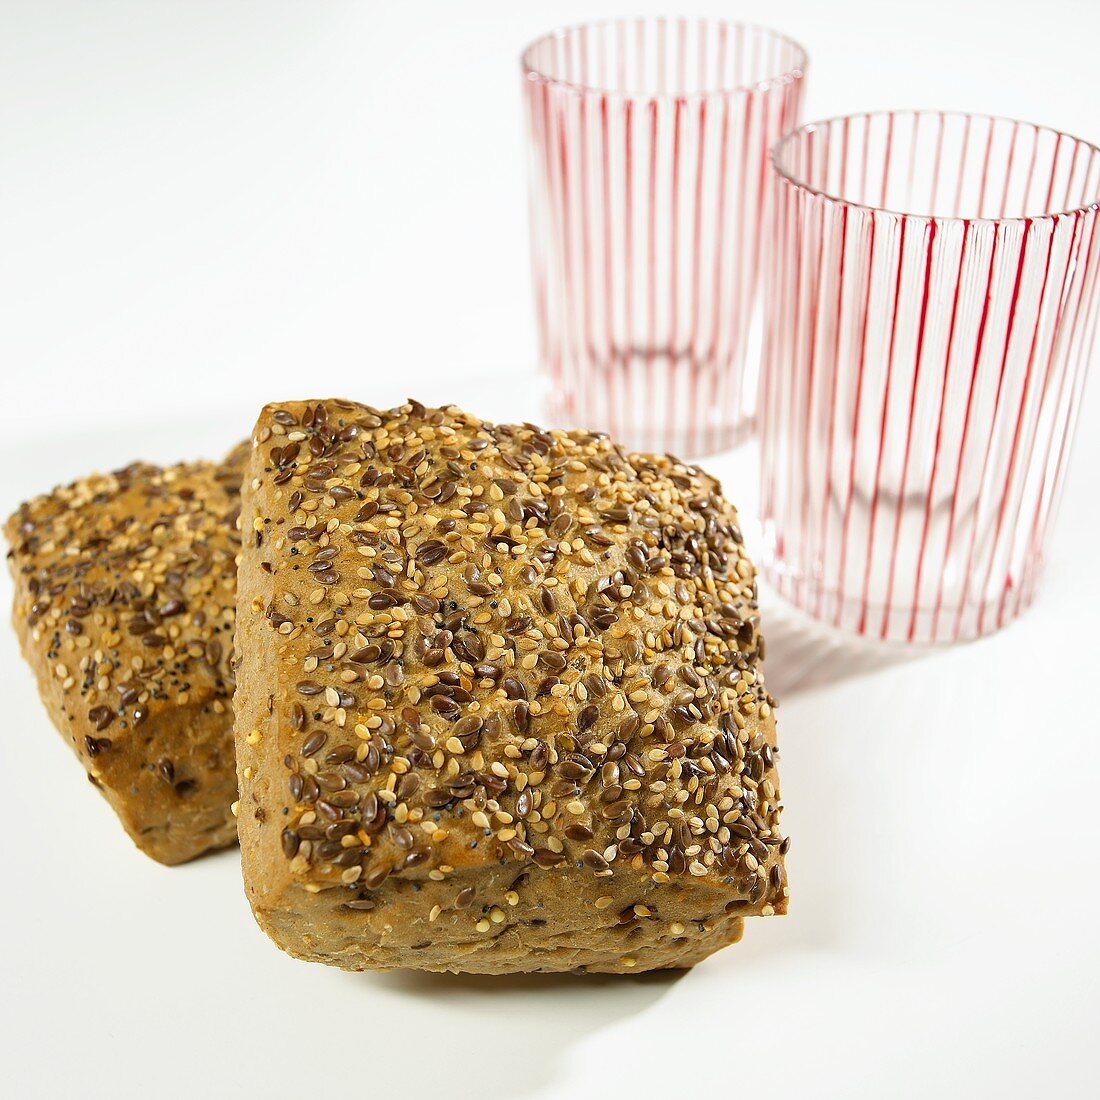 Two wholemeal rolls and two glasses